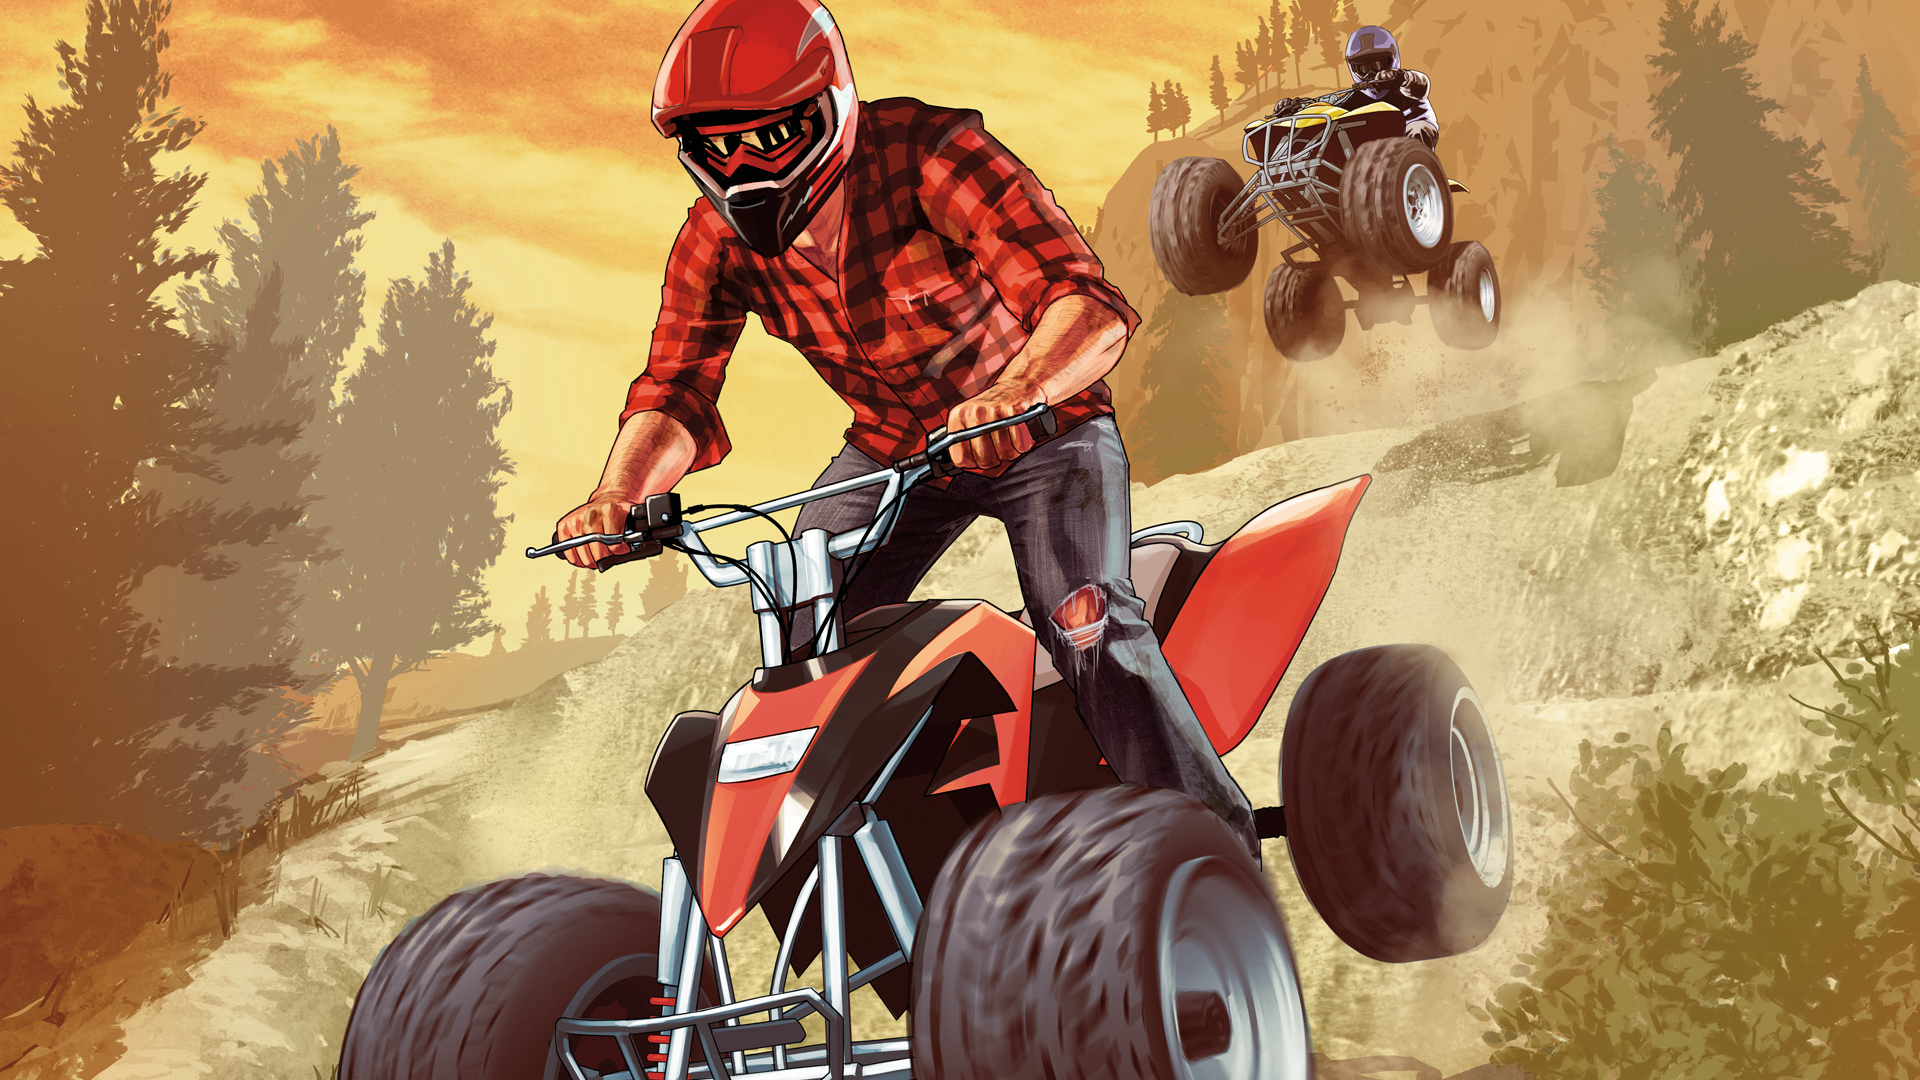 ATV Racing. Wallpaper from Grand Theft Auto Online